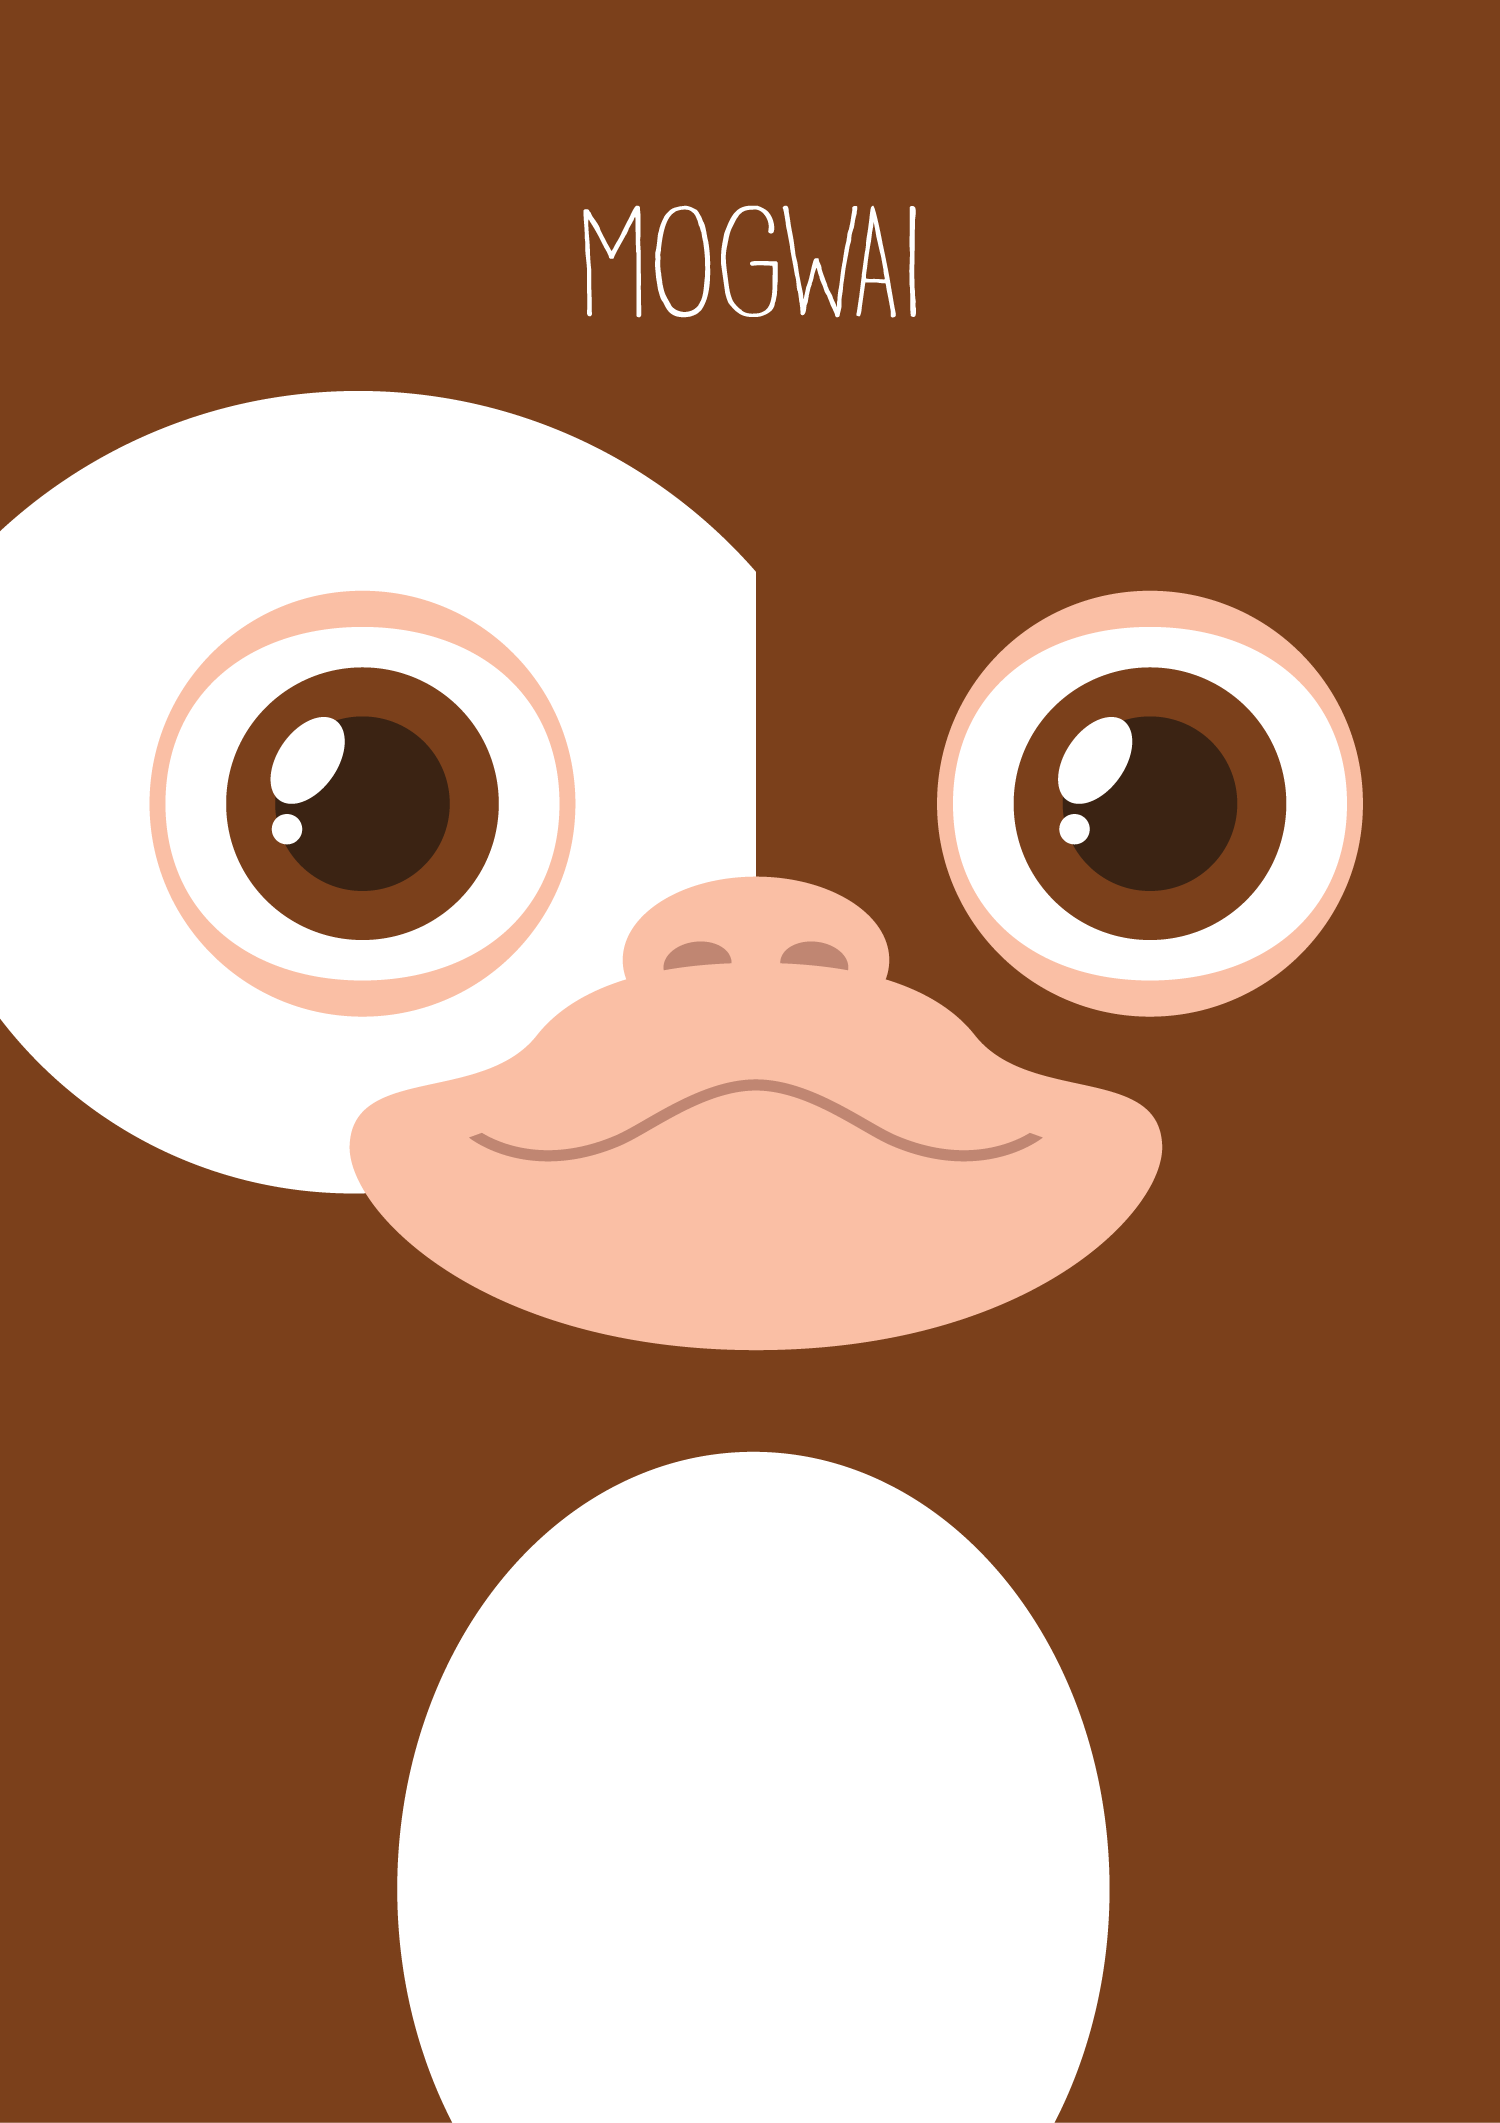 Gremlins Minimalist Series. Available on my Redbubble shop